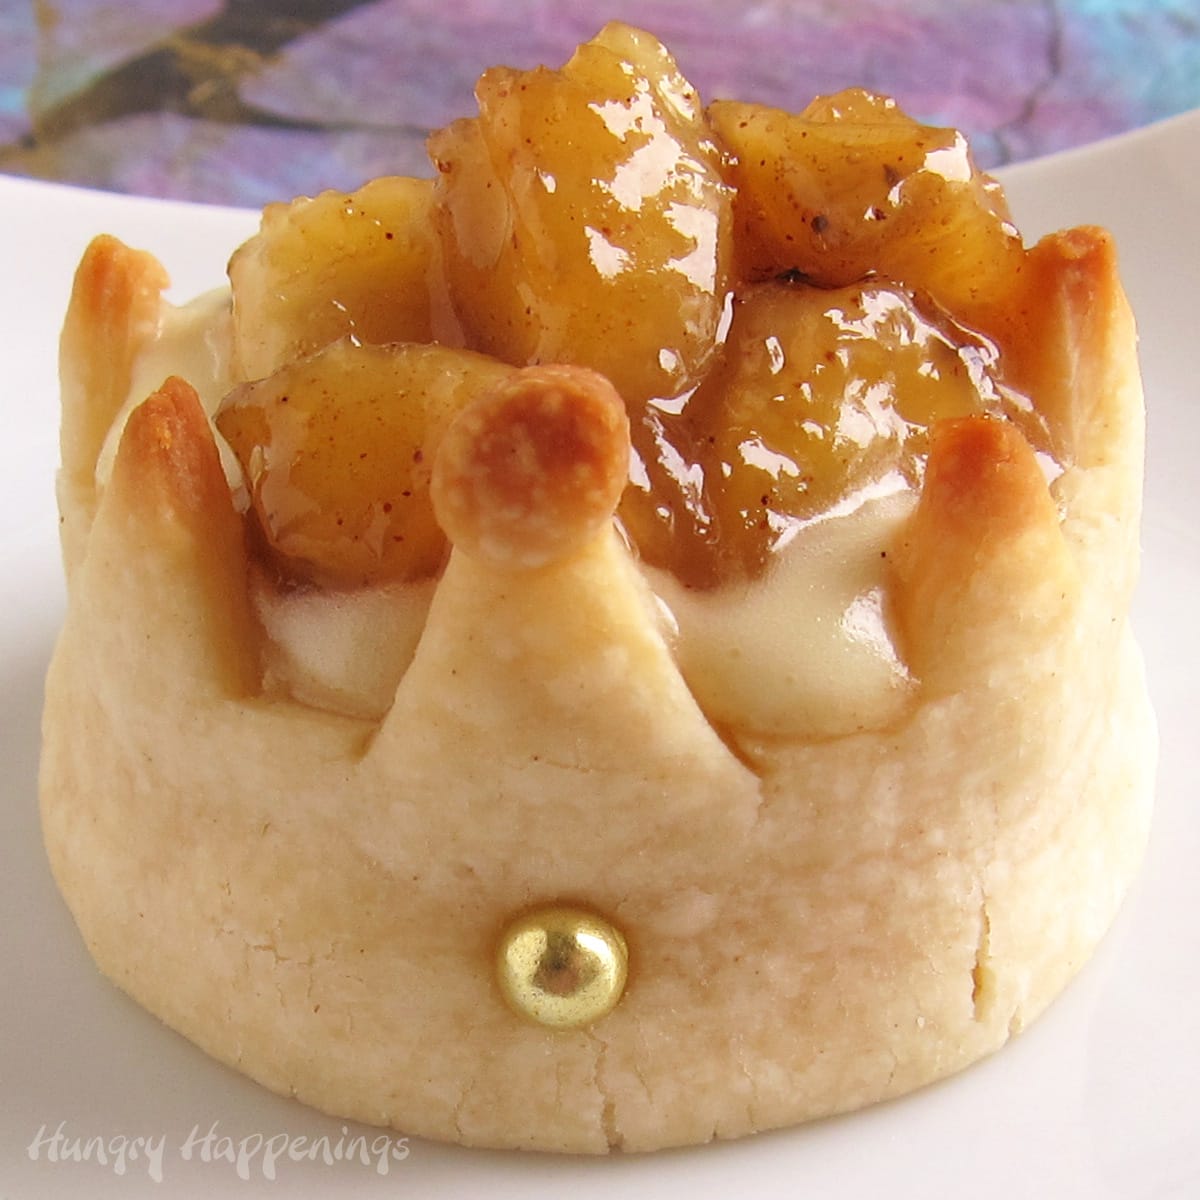 pastry crowns filled with cheesecake mousse and caramelized bananas